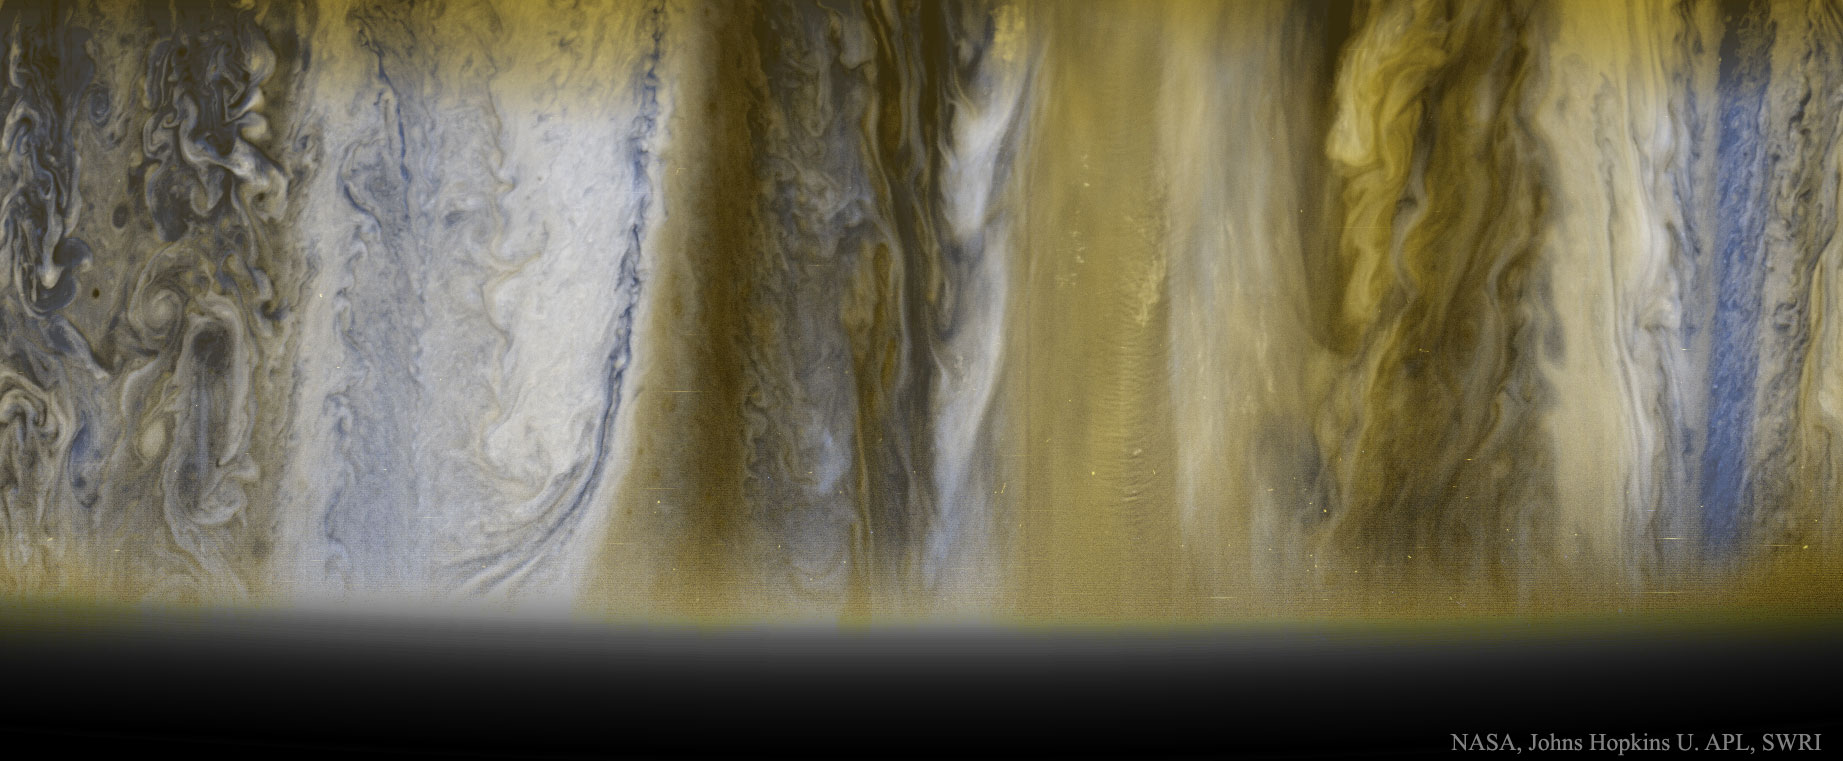 New Horizons arrives at Jupiter and takes amazing pictures of the clouds.